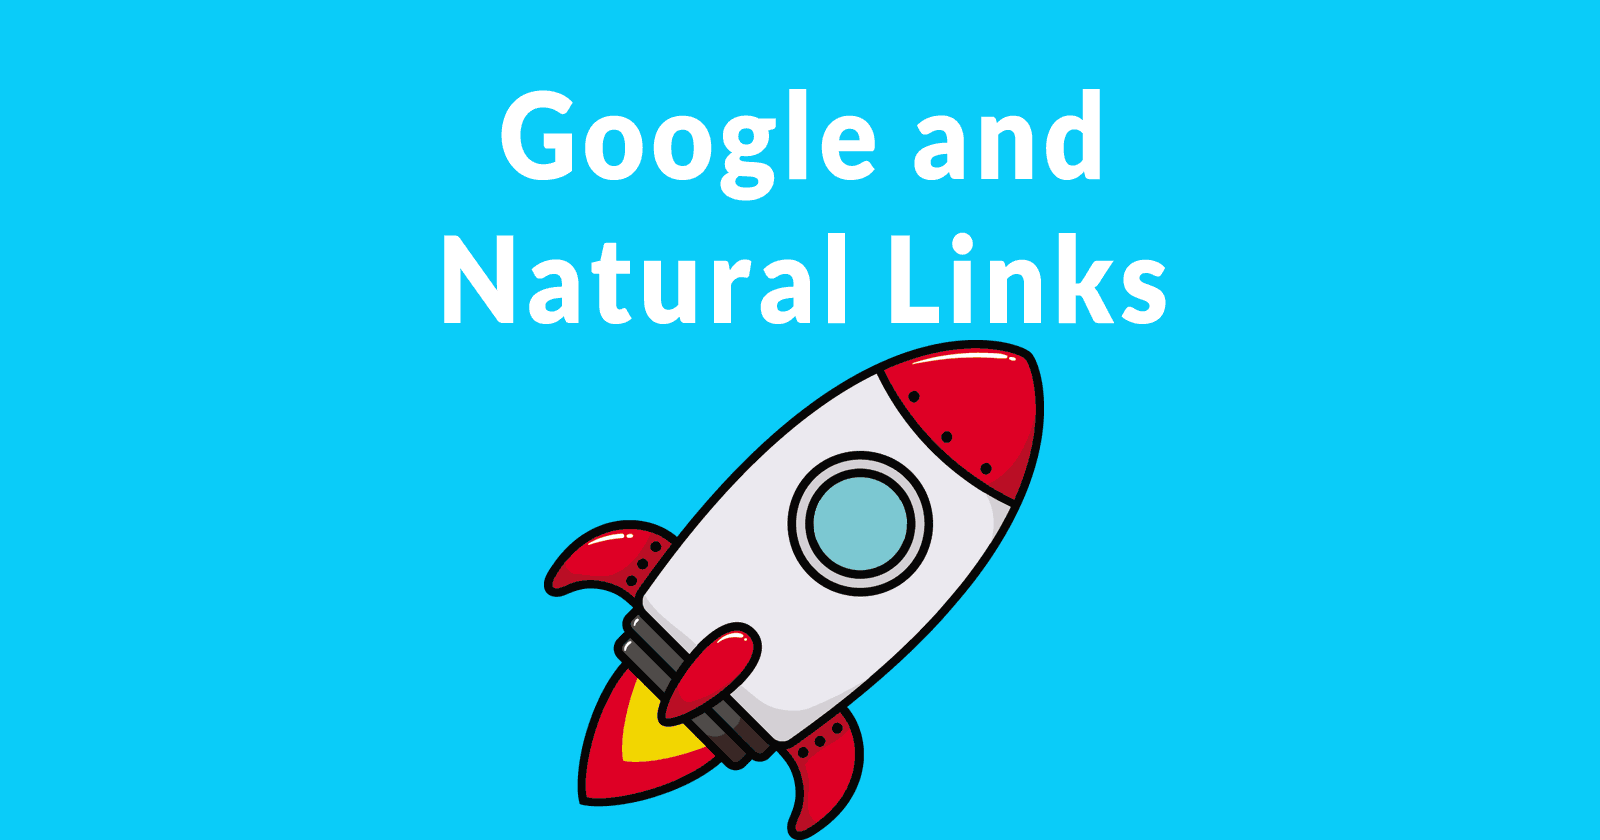 Google and natural links in search marketing